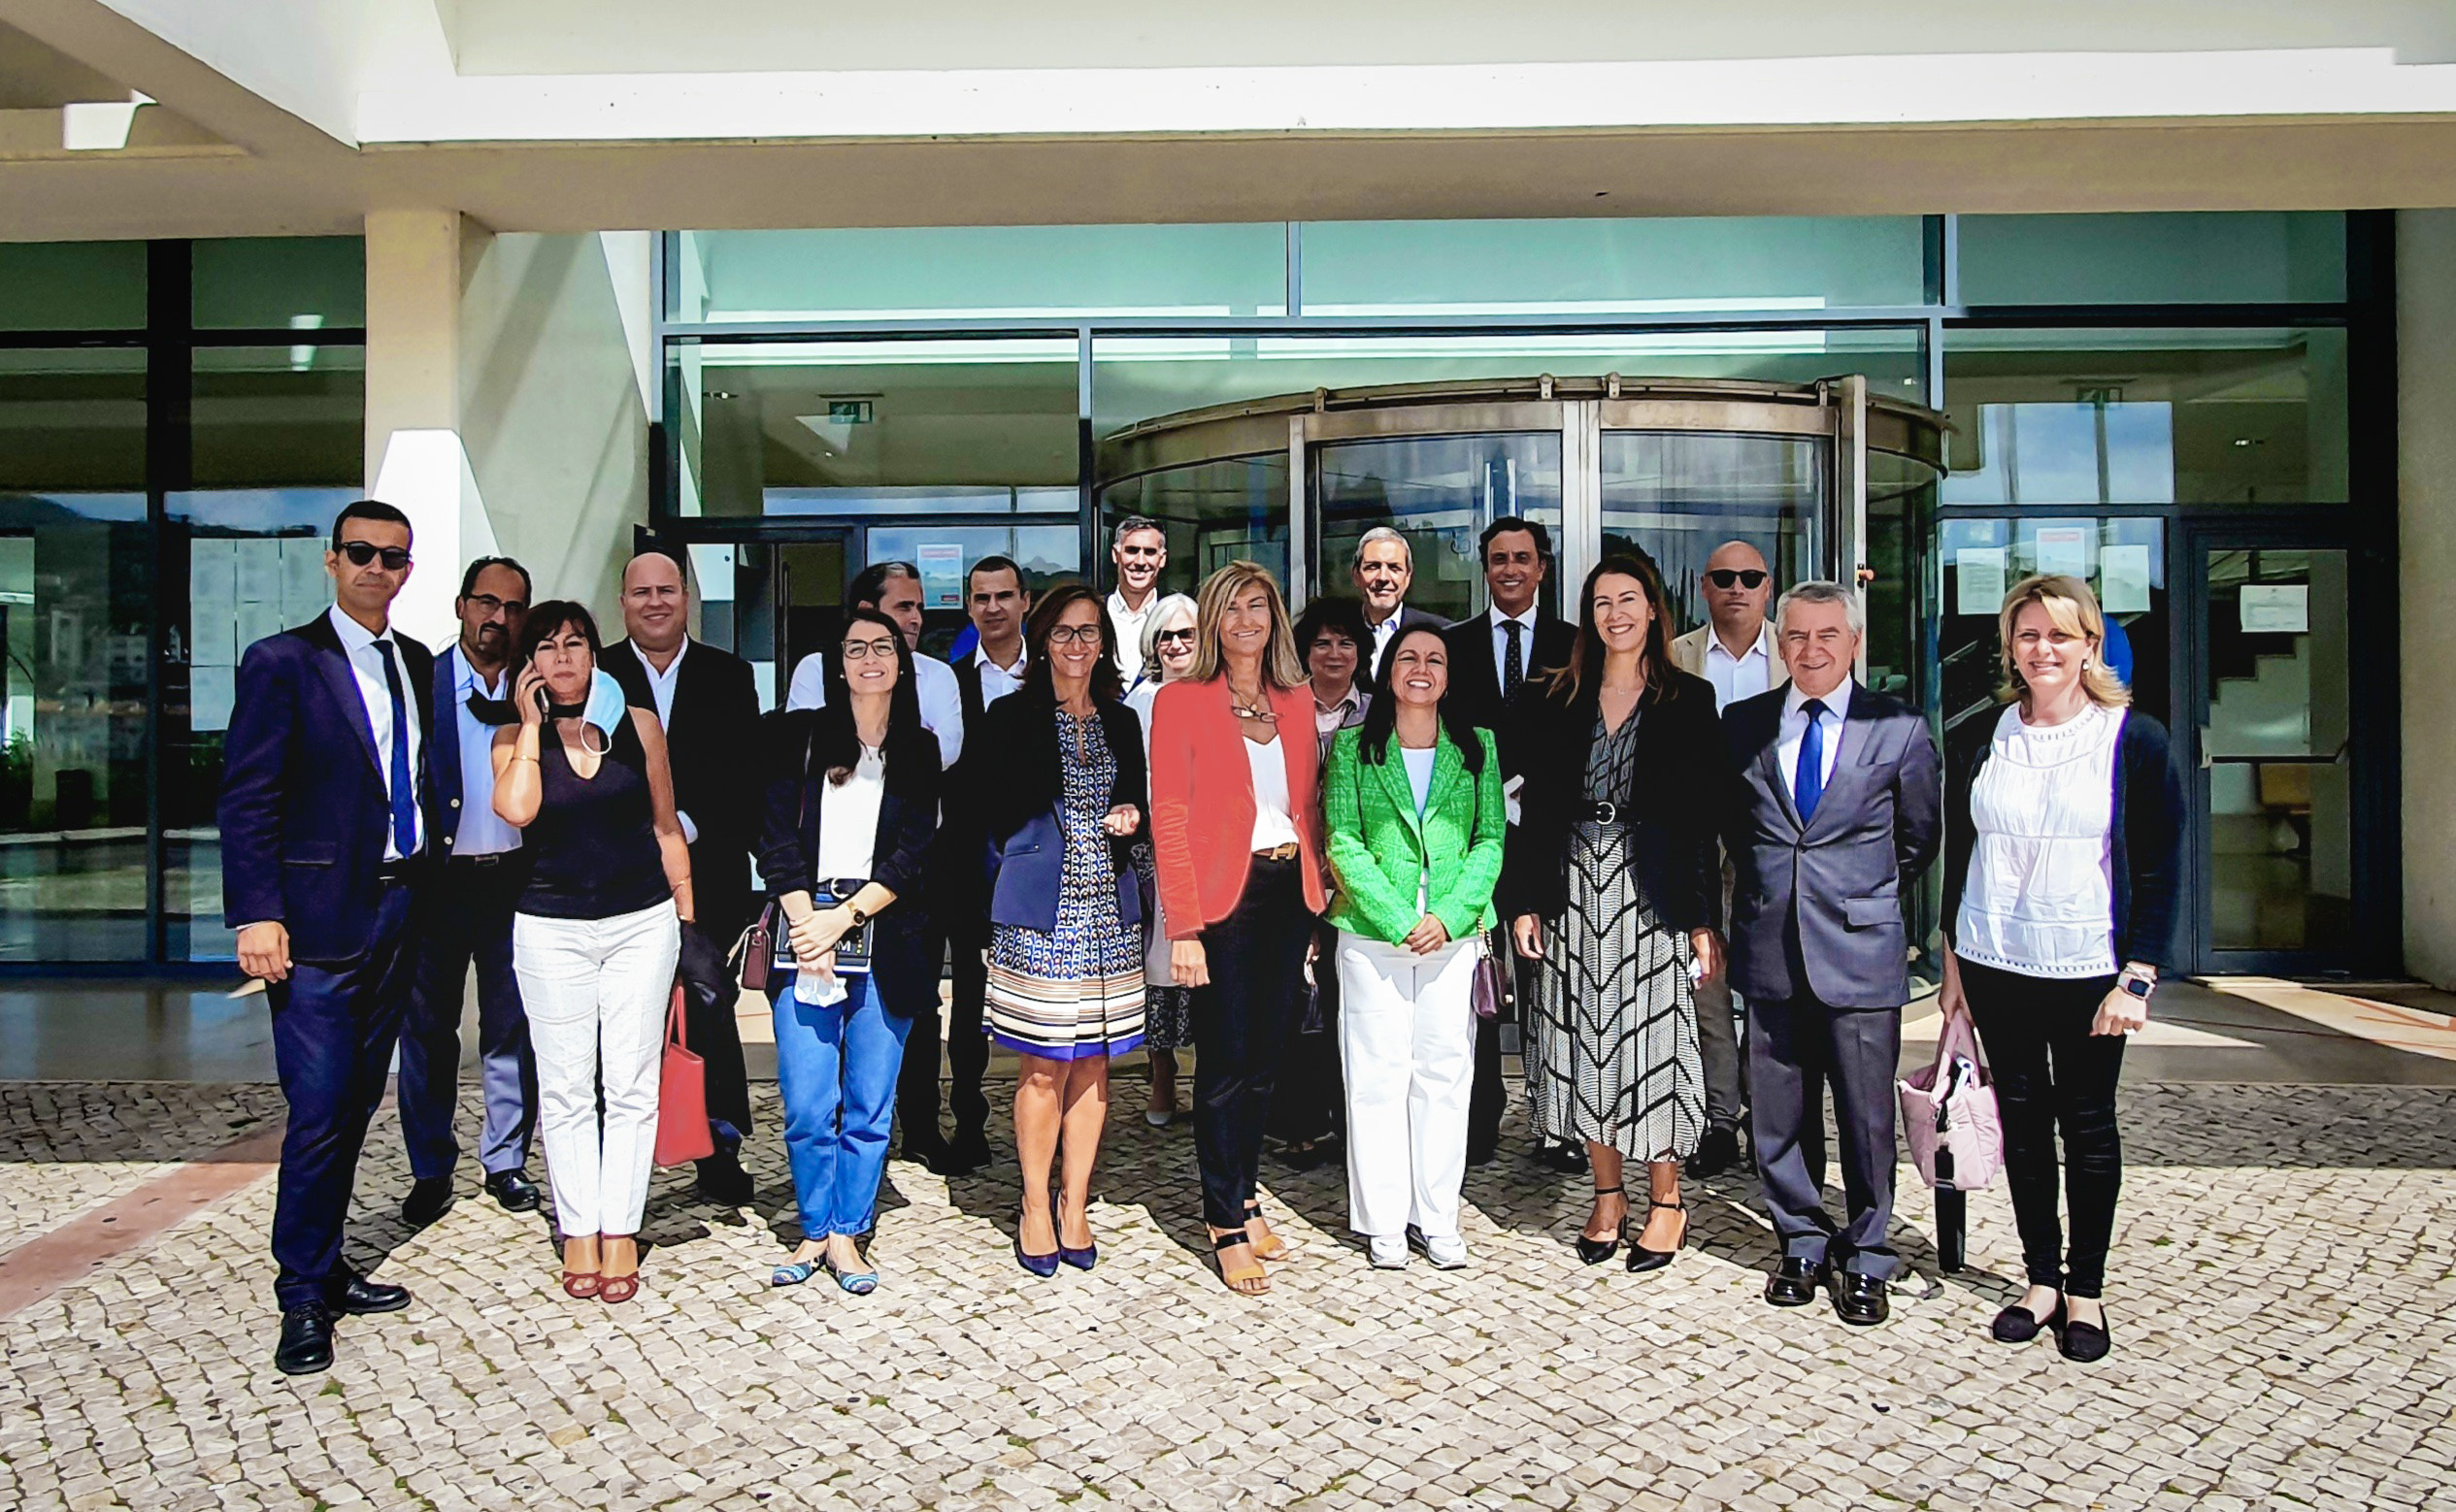 Paula Meira Lourenço and Sandro Mendonça, members of the Board of Directors, and the team that attended the meeting.